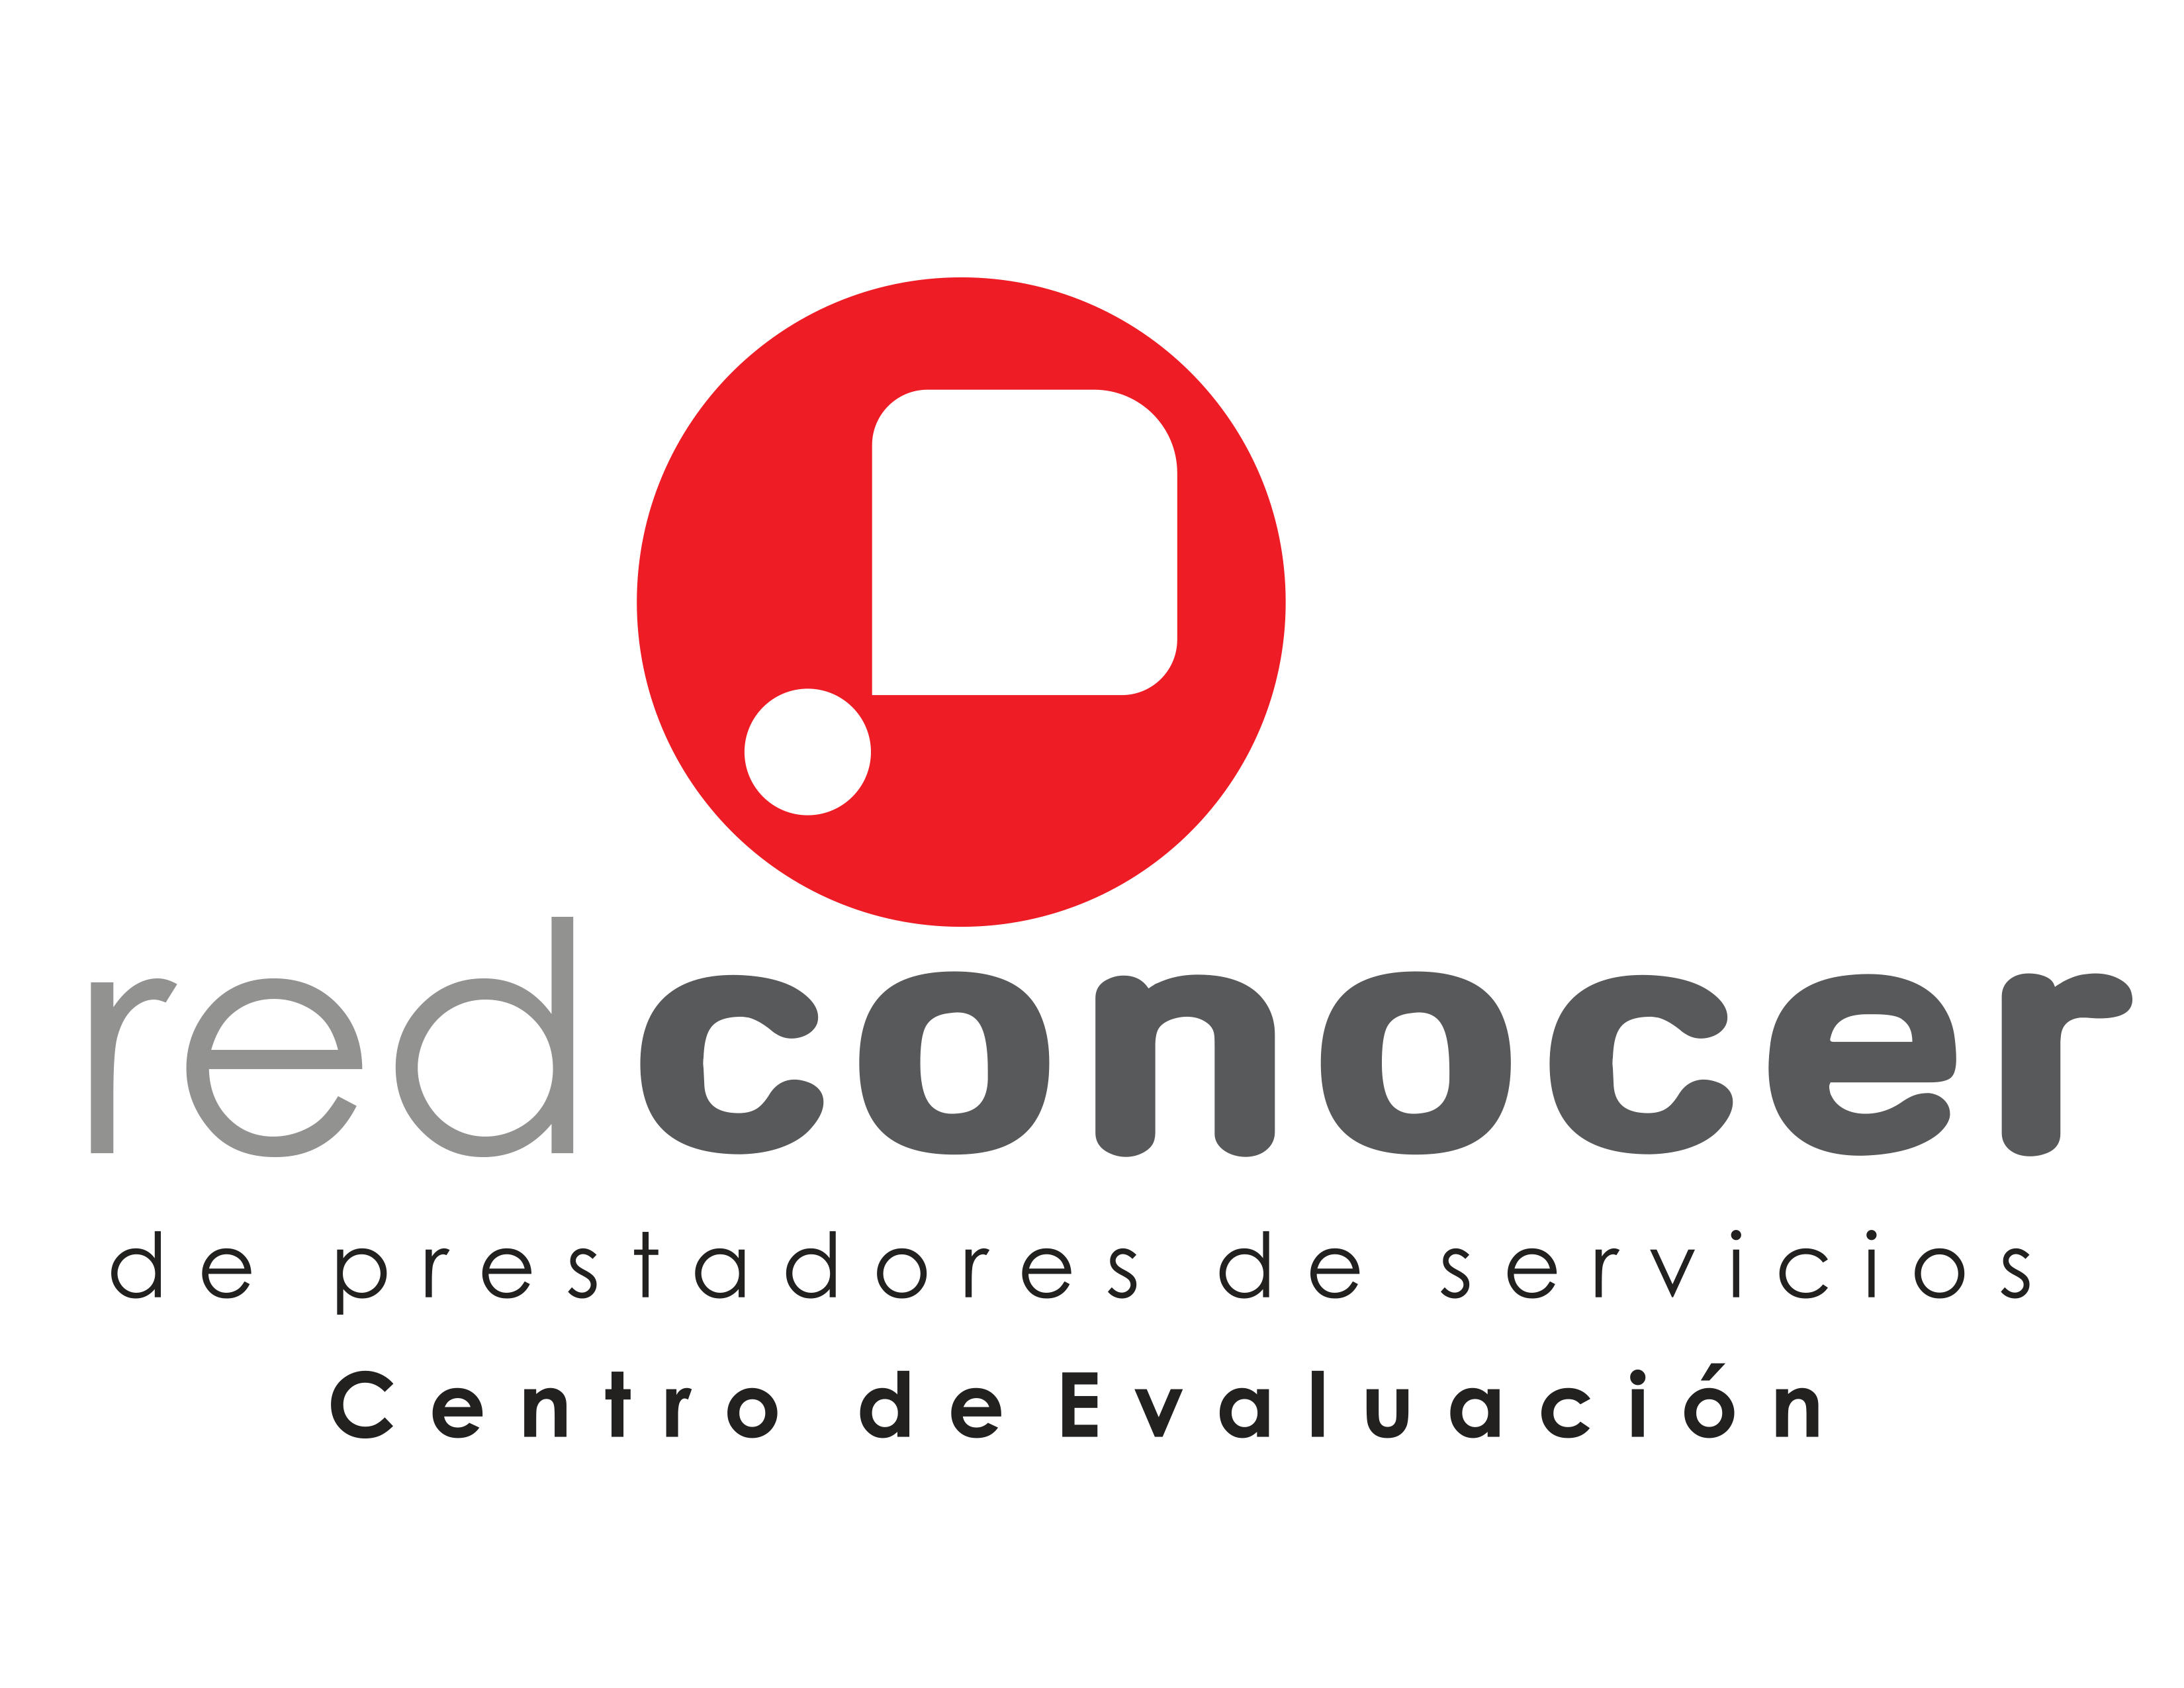 Red conocer